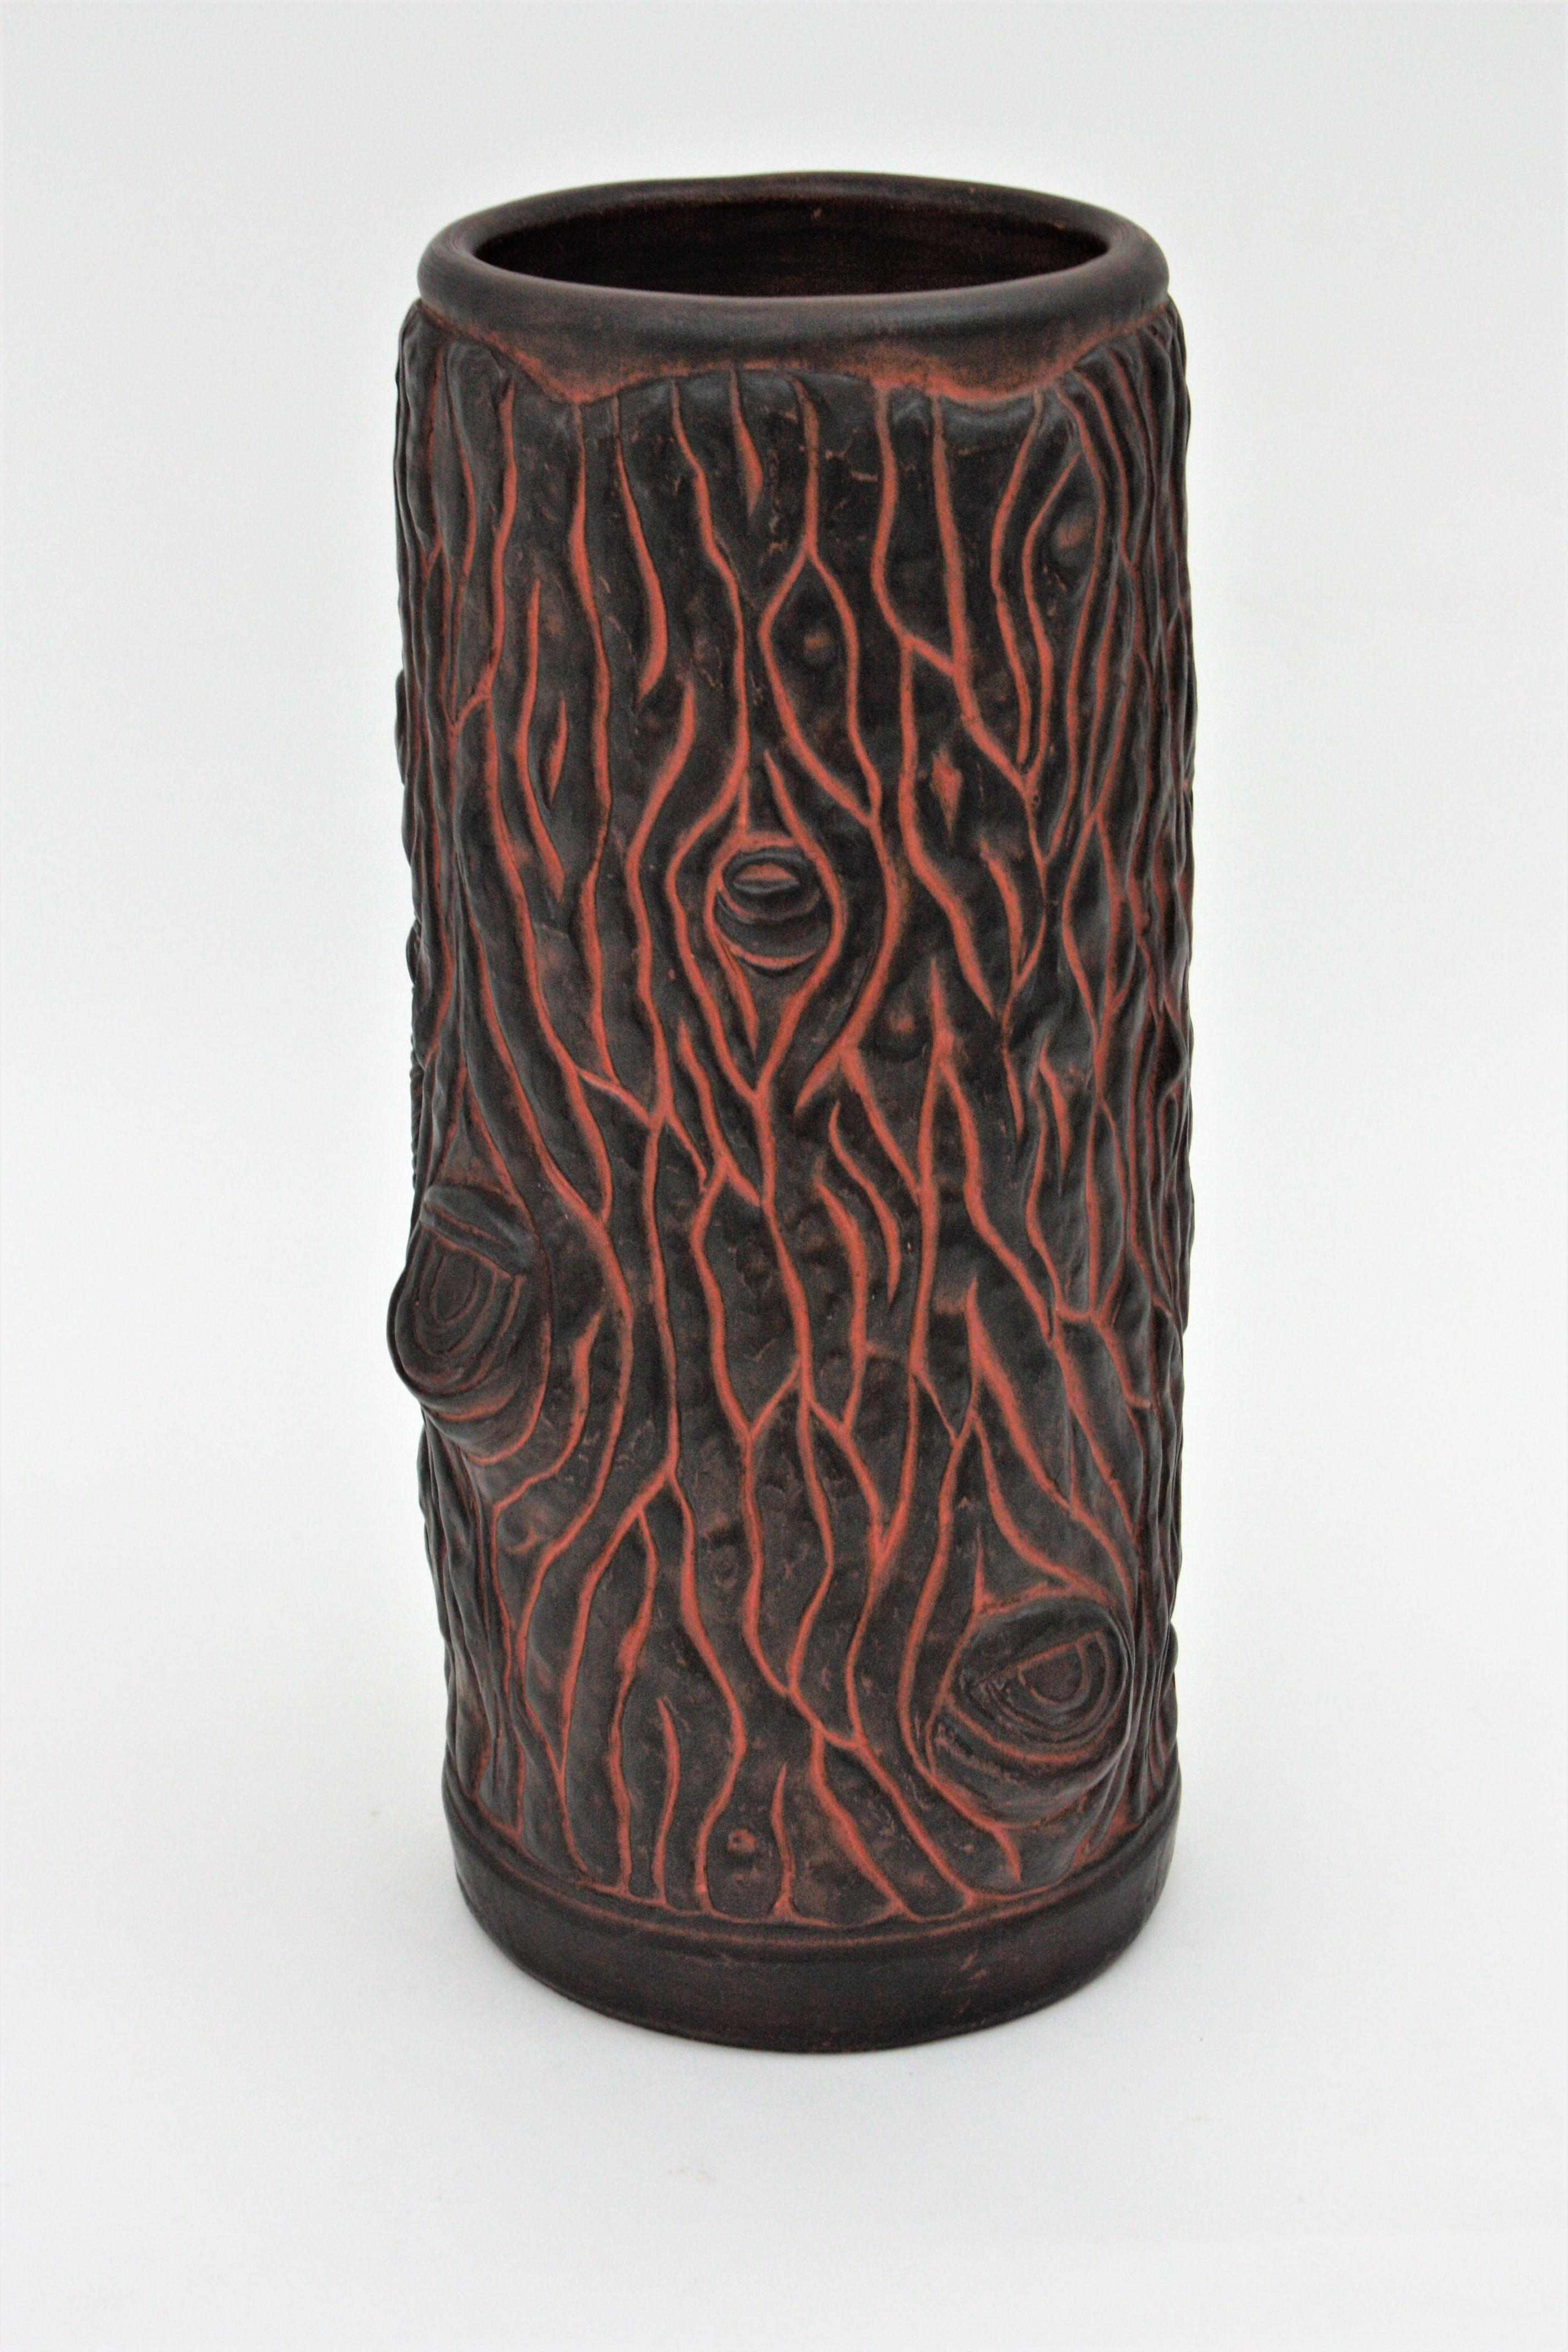 French Umbrella Stand in Faux Wood Terracotta, Log Shape, 1960s In Good Condition For Sale In Barcelona, ES